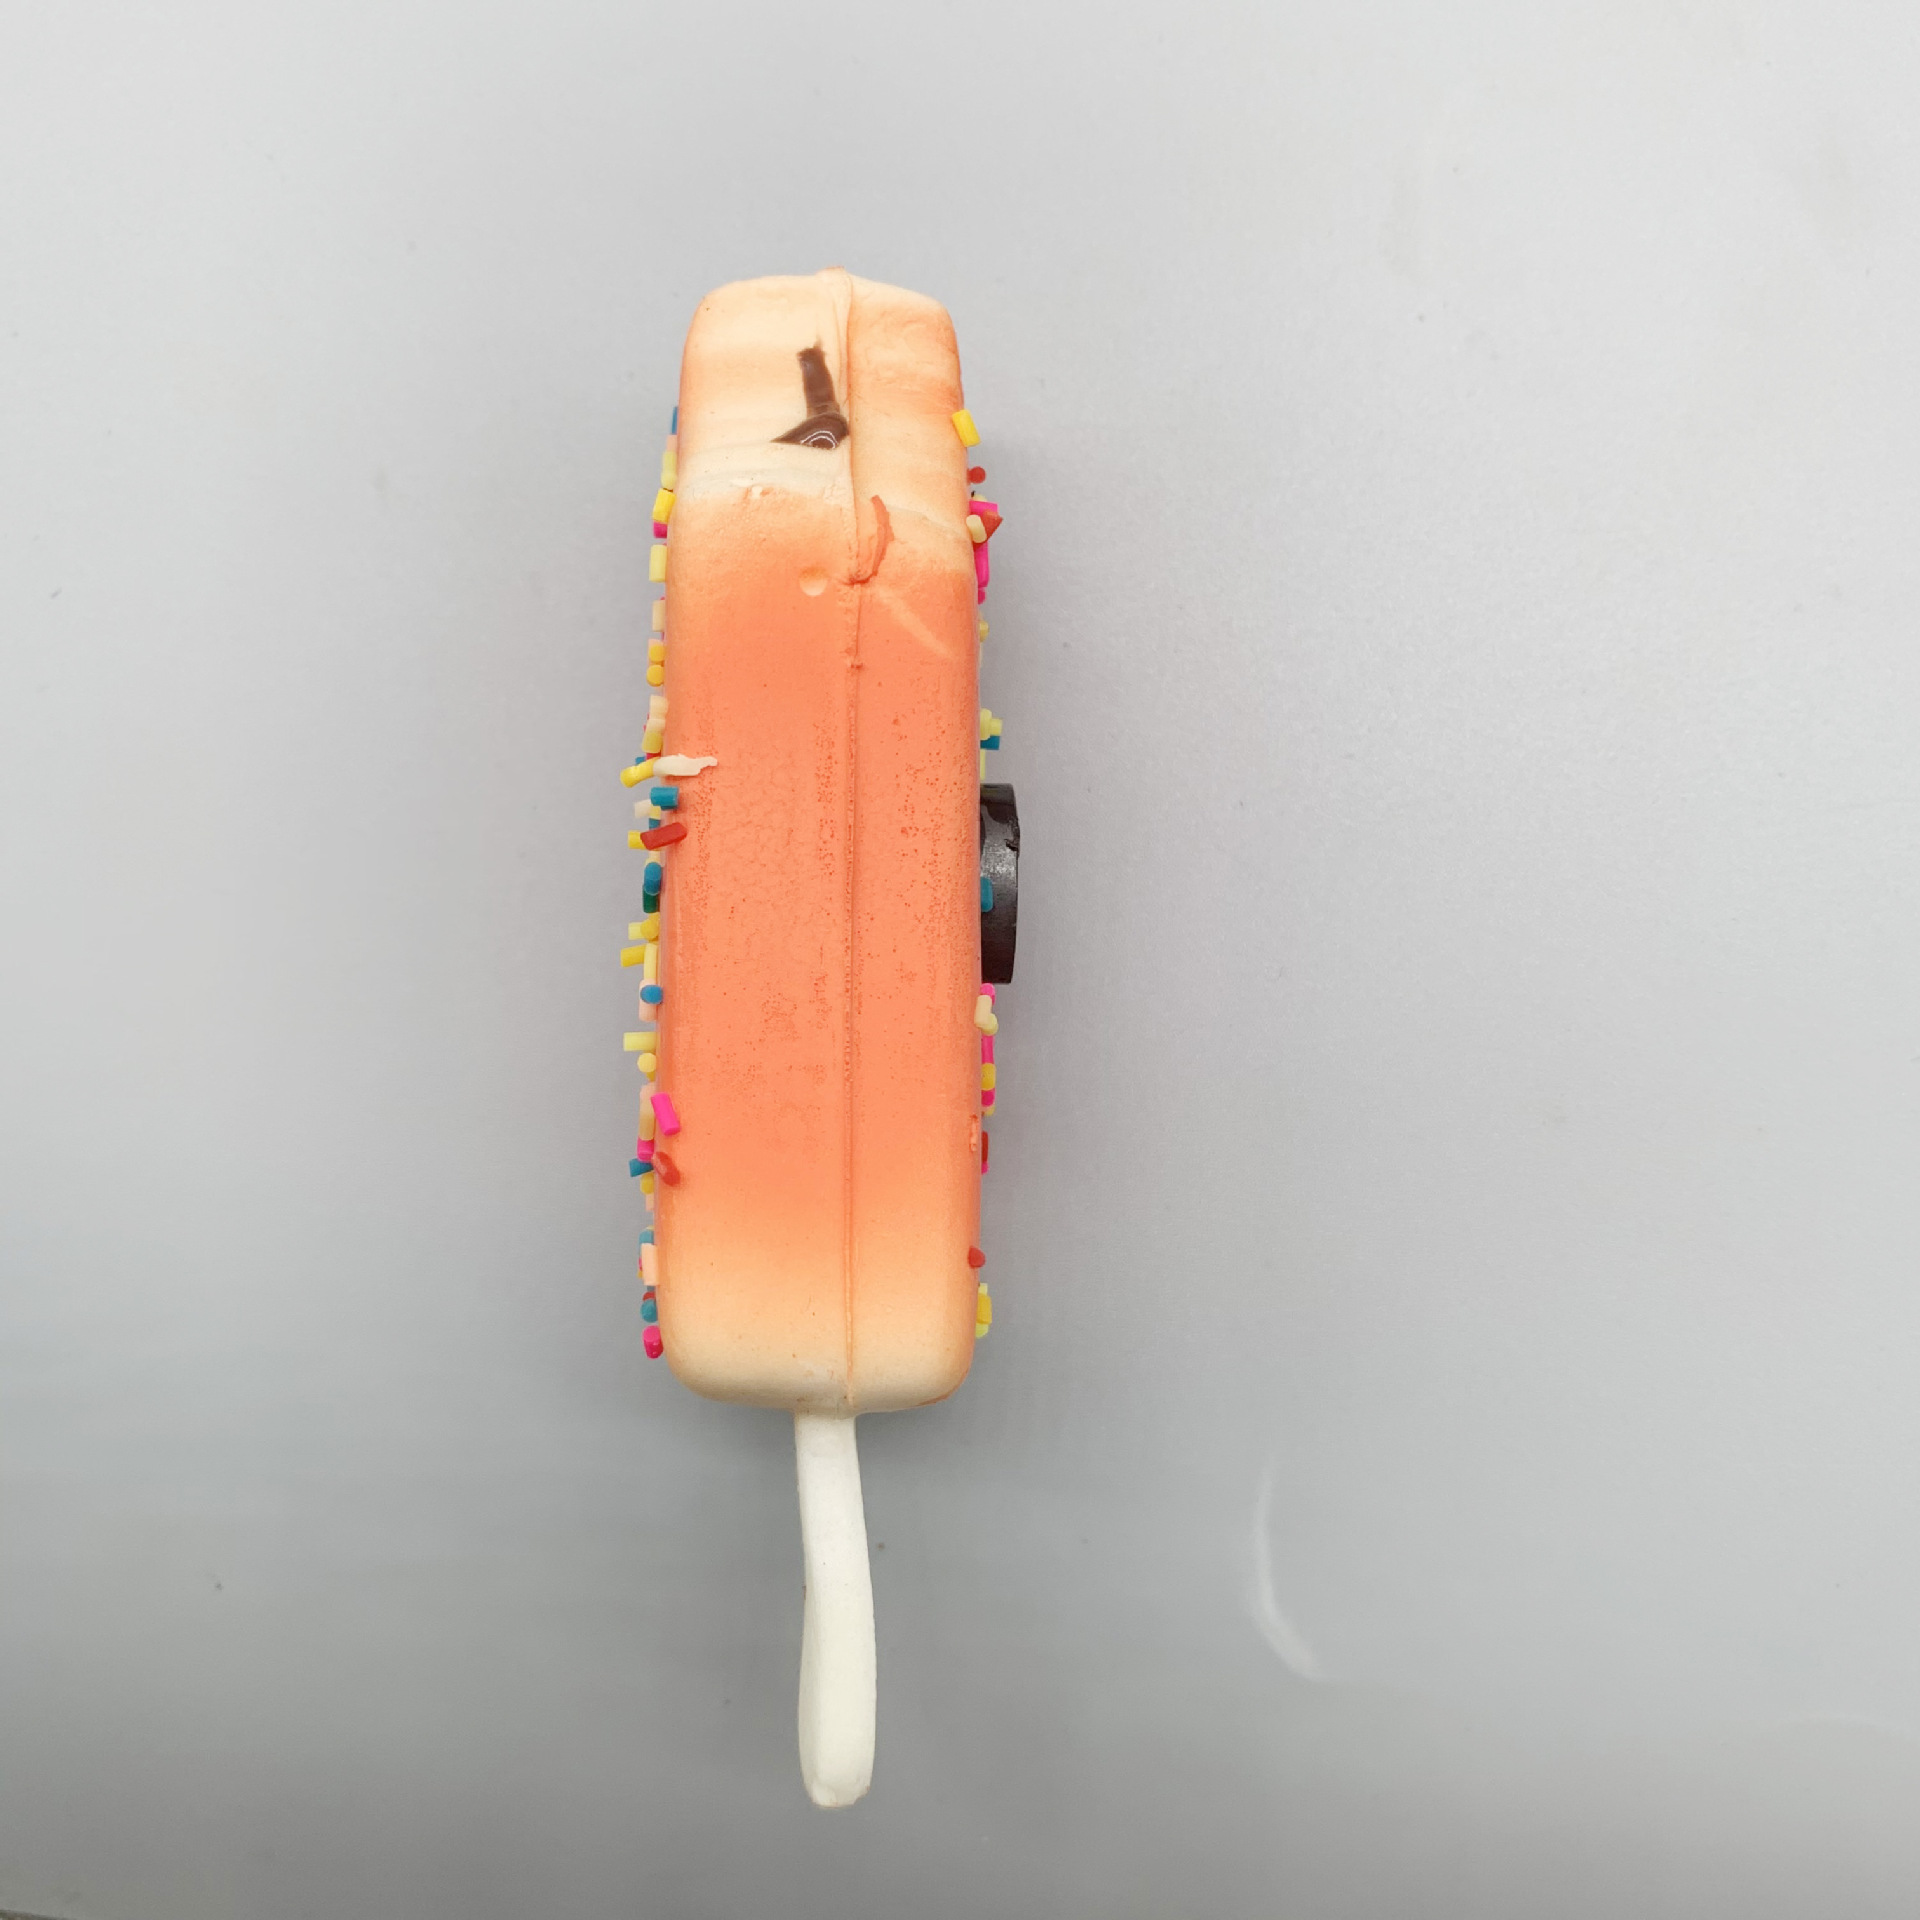 Bite Popsicle Slow Rebound Refridgerator Magnets Loan Magnet Soft Squeezing Toy Simulation Food Candy Toy